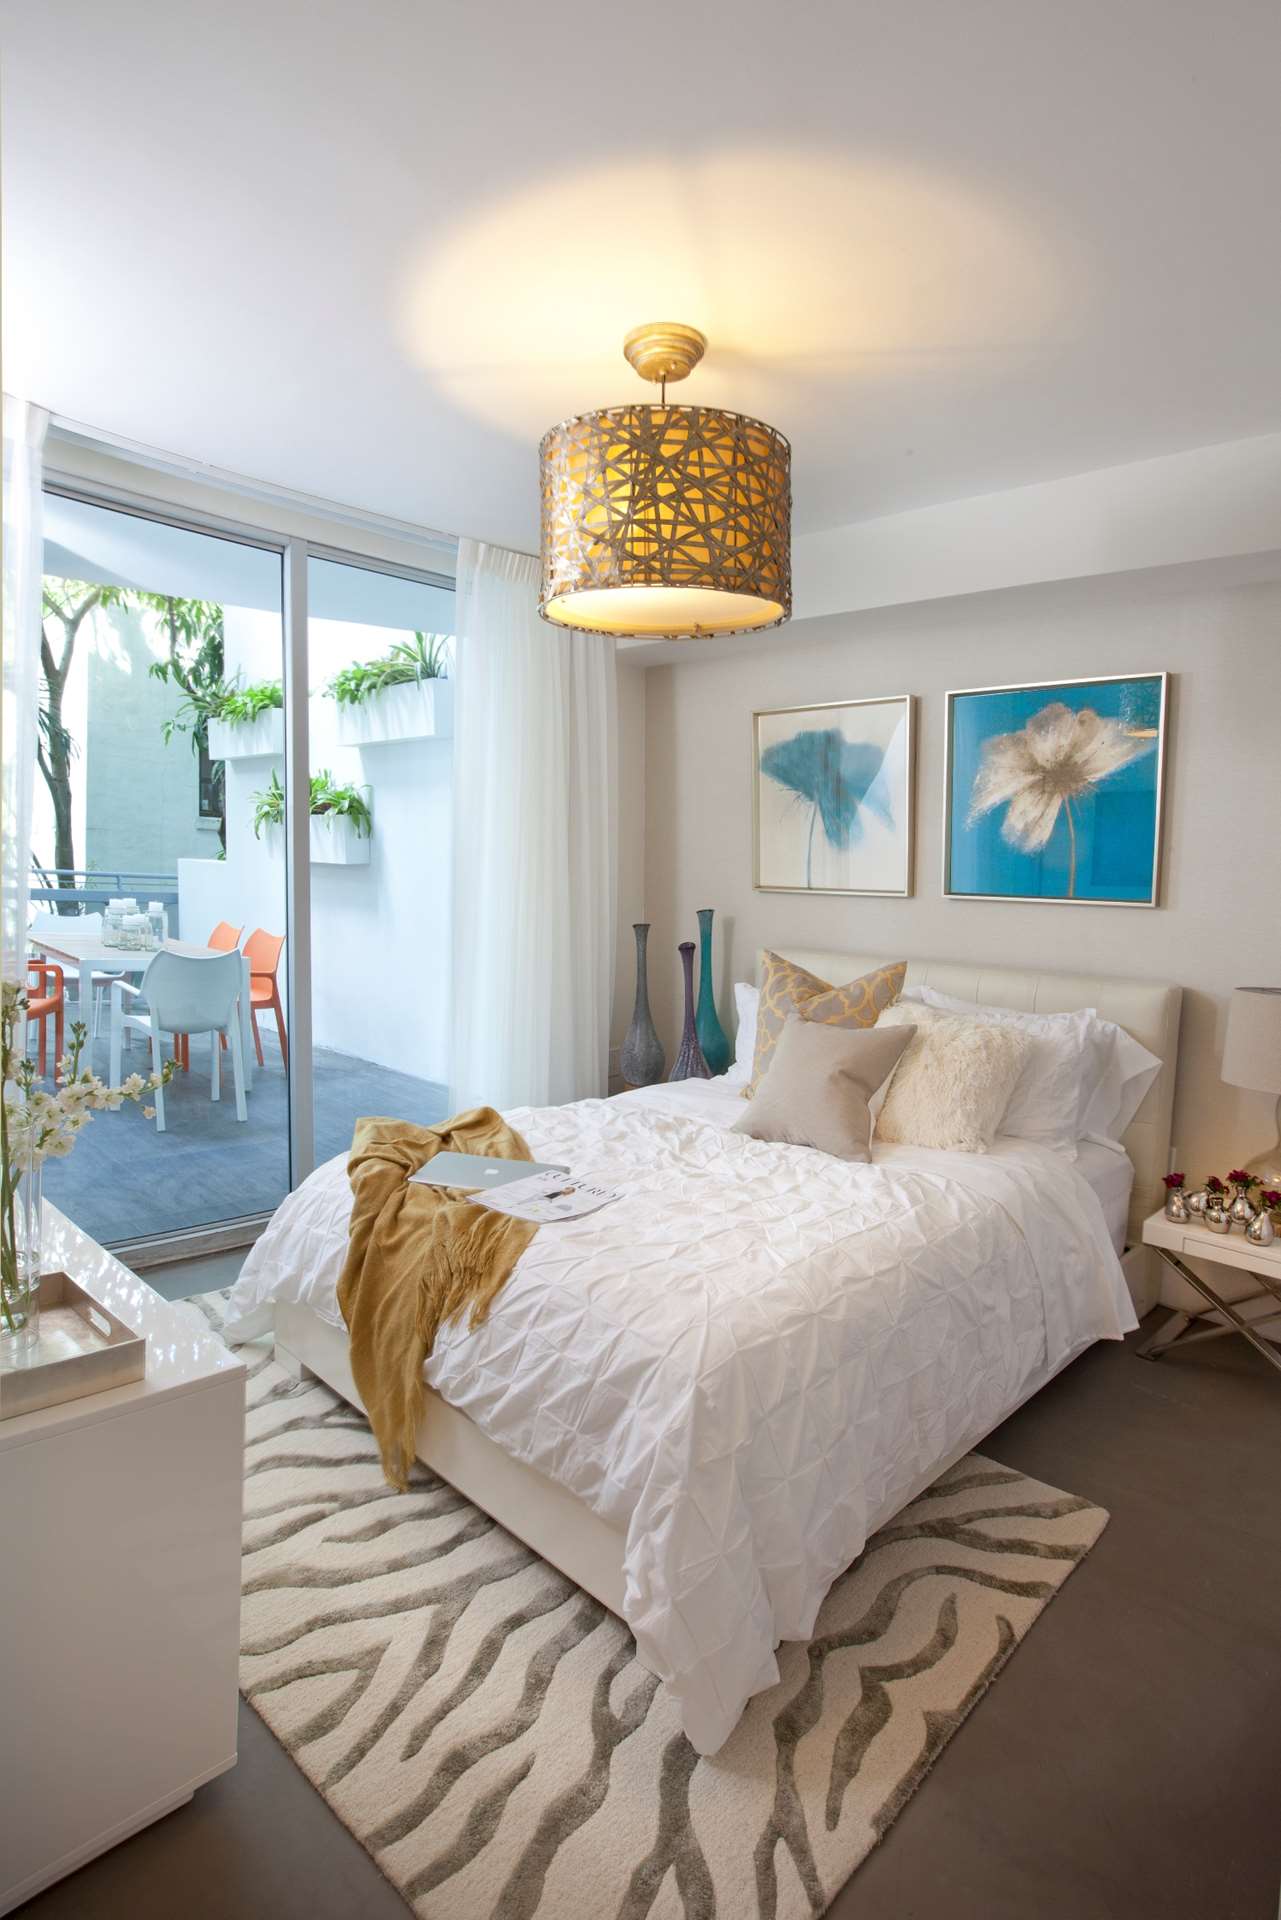 beach chic bedroom guest interior south bedrooms modern miami look interiors dkor dkorinteriors houzz review